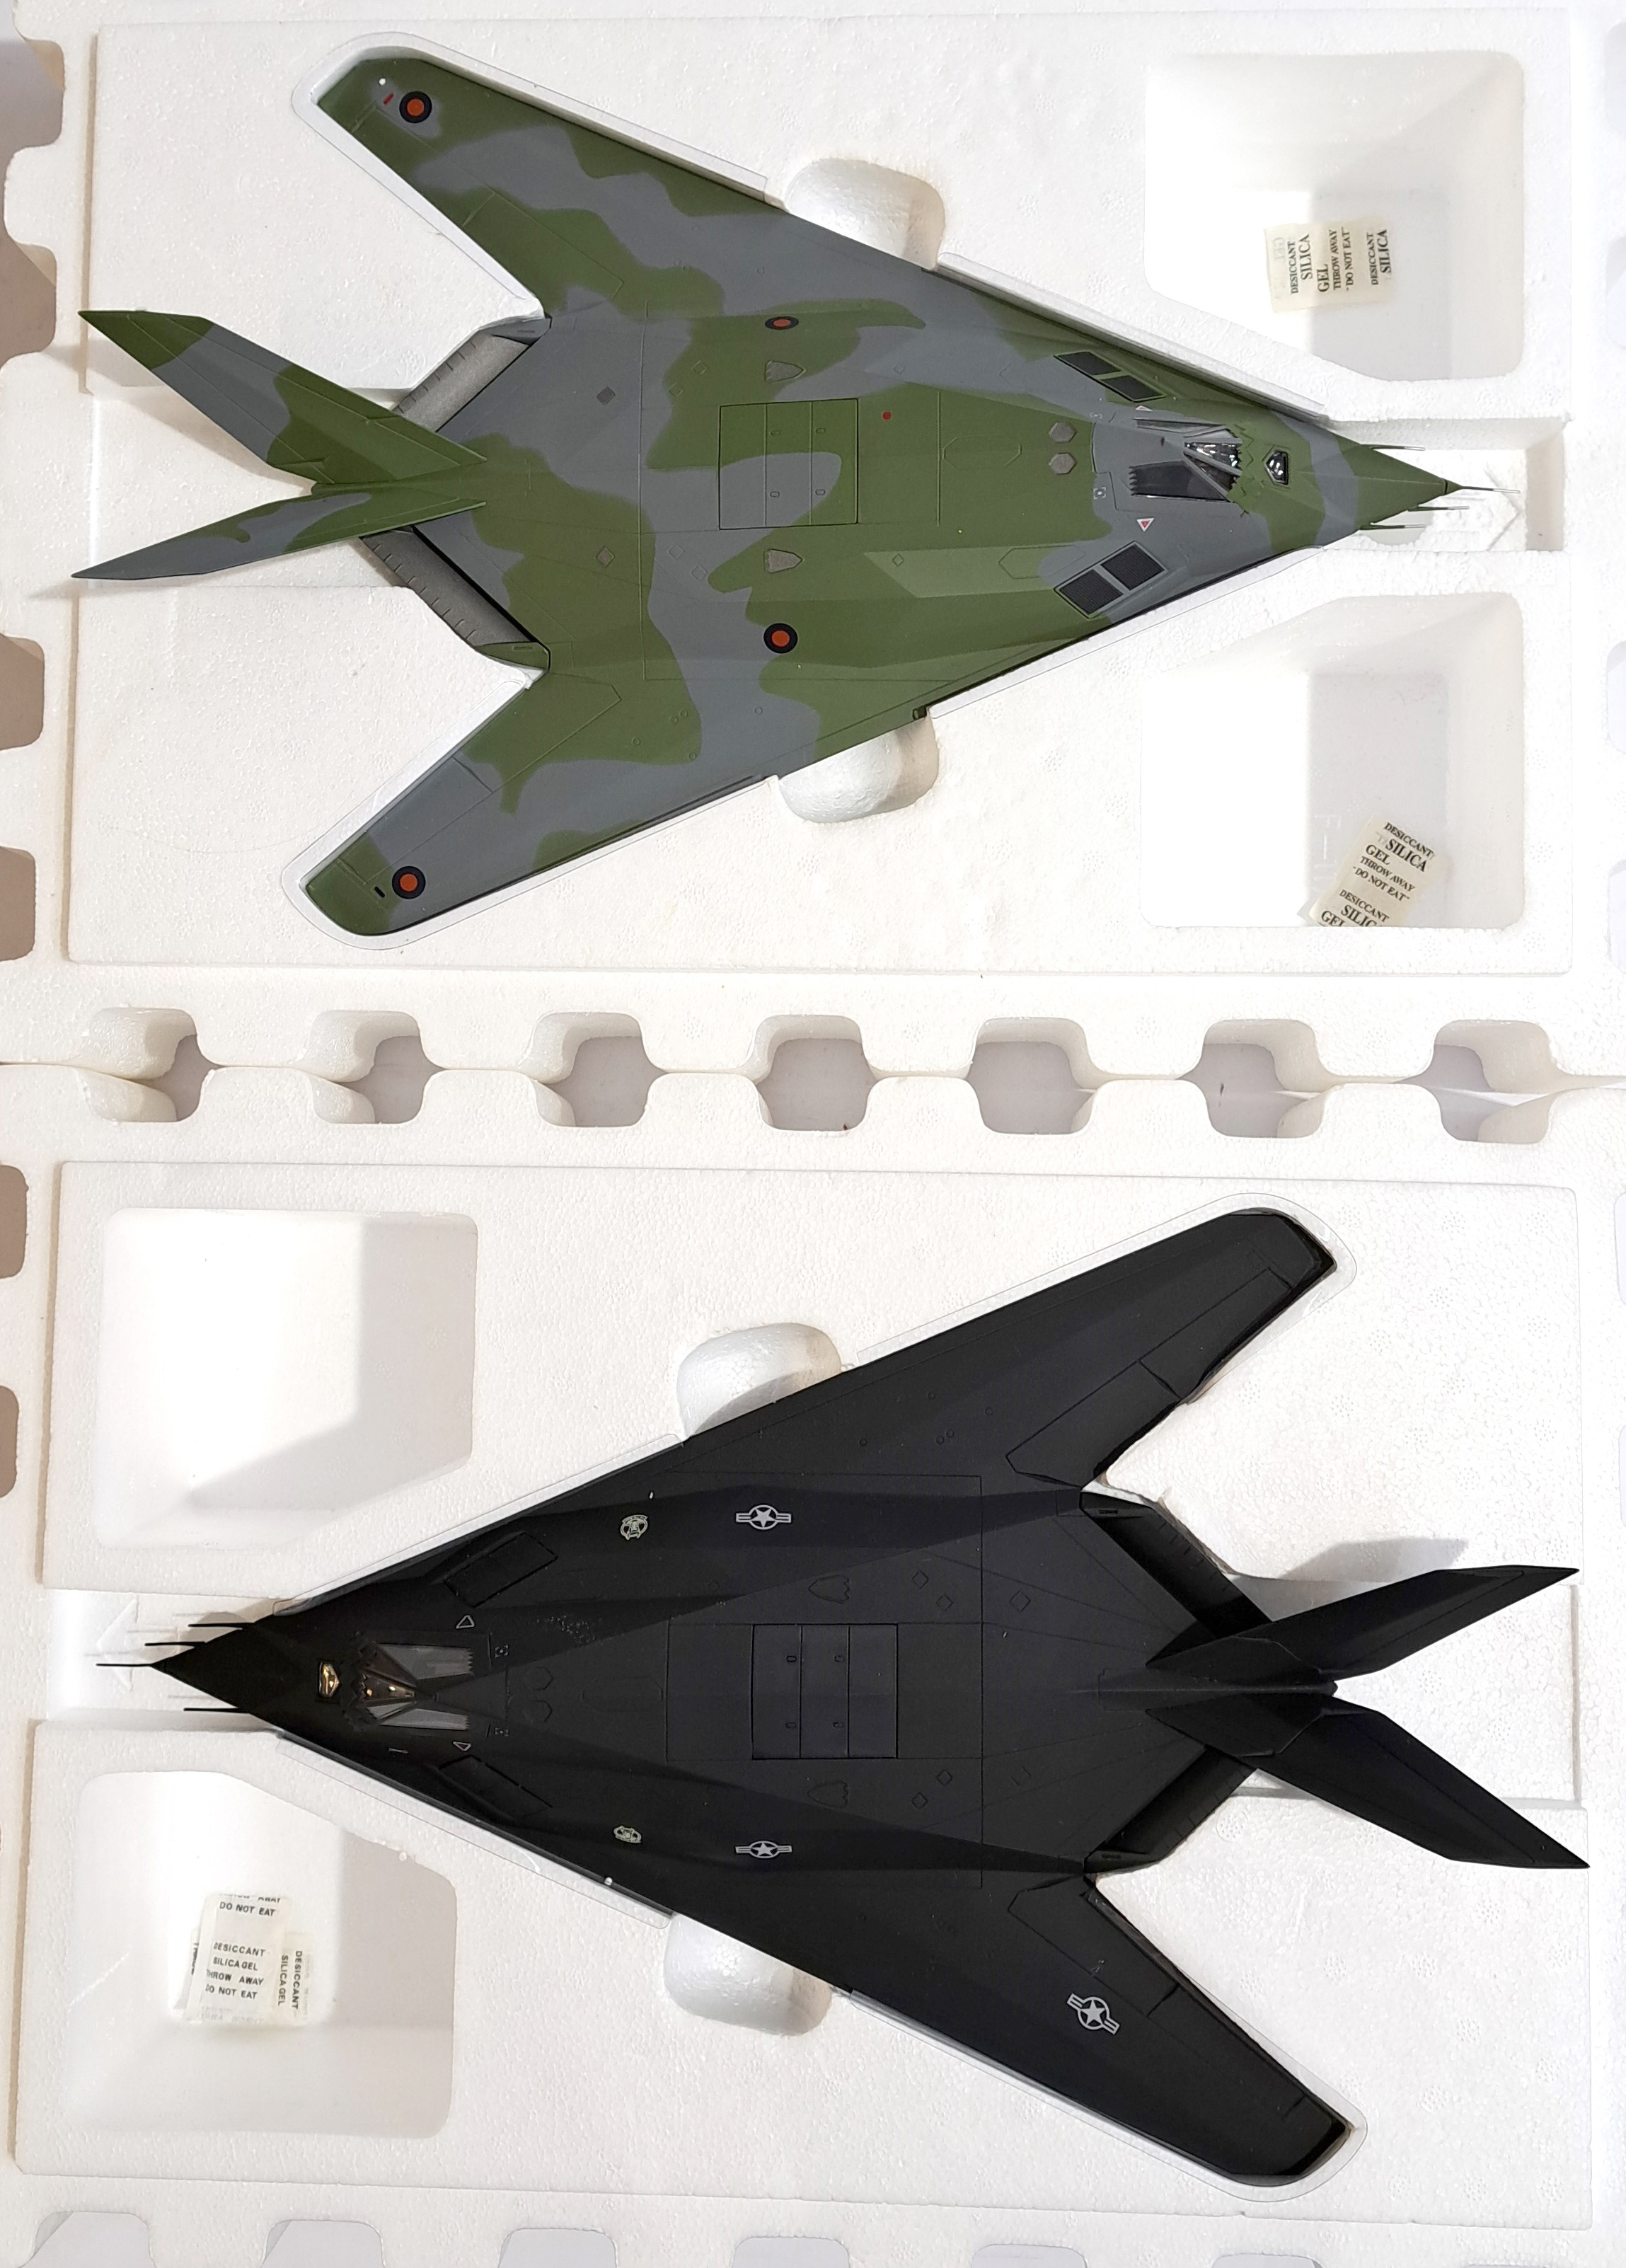 Franklin Mint  "Armour Collection", a boxed pair of 1:48 scaleF117 Stealth Fighter Jets - Image 2 of 4